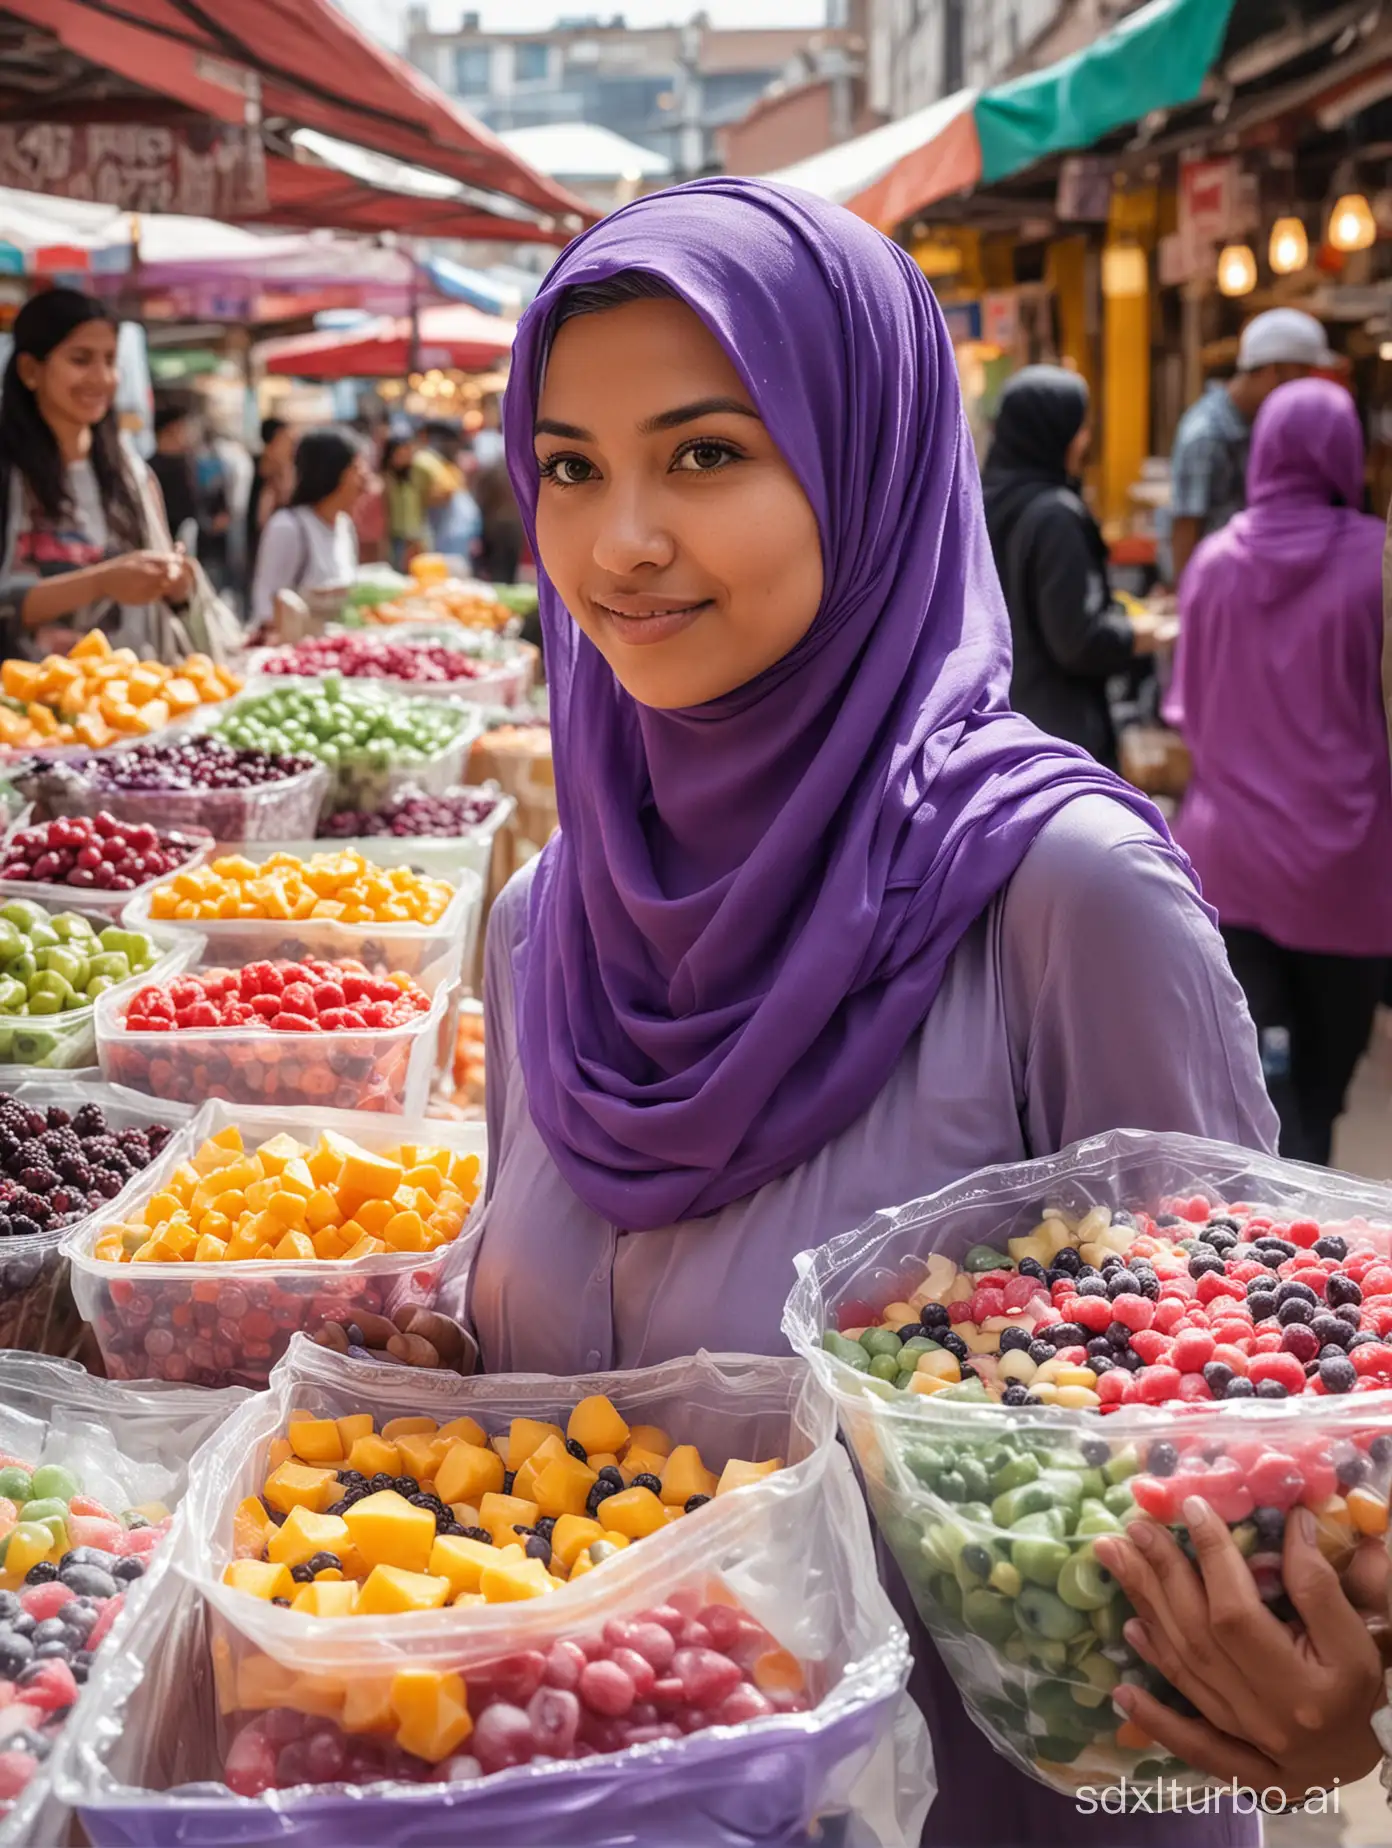 Purple-Hijab-Woman-Shopping-for-Colorful-Fruit-Soup-and-Boba-Ice-at-Busy-Market